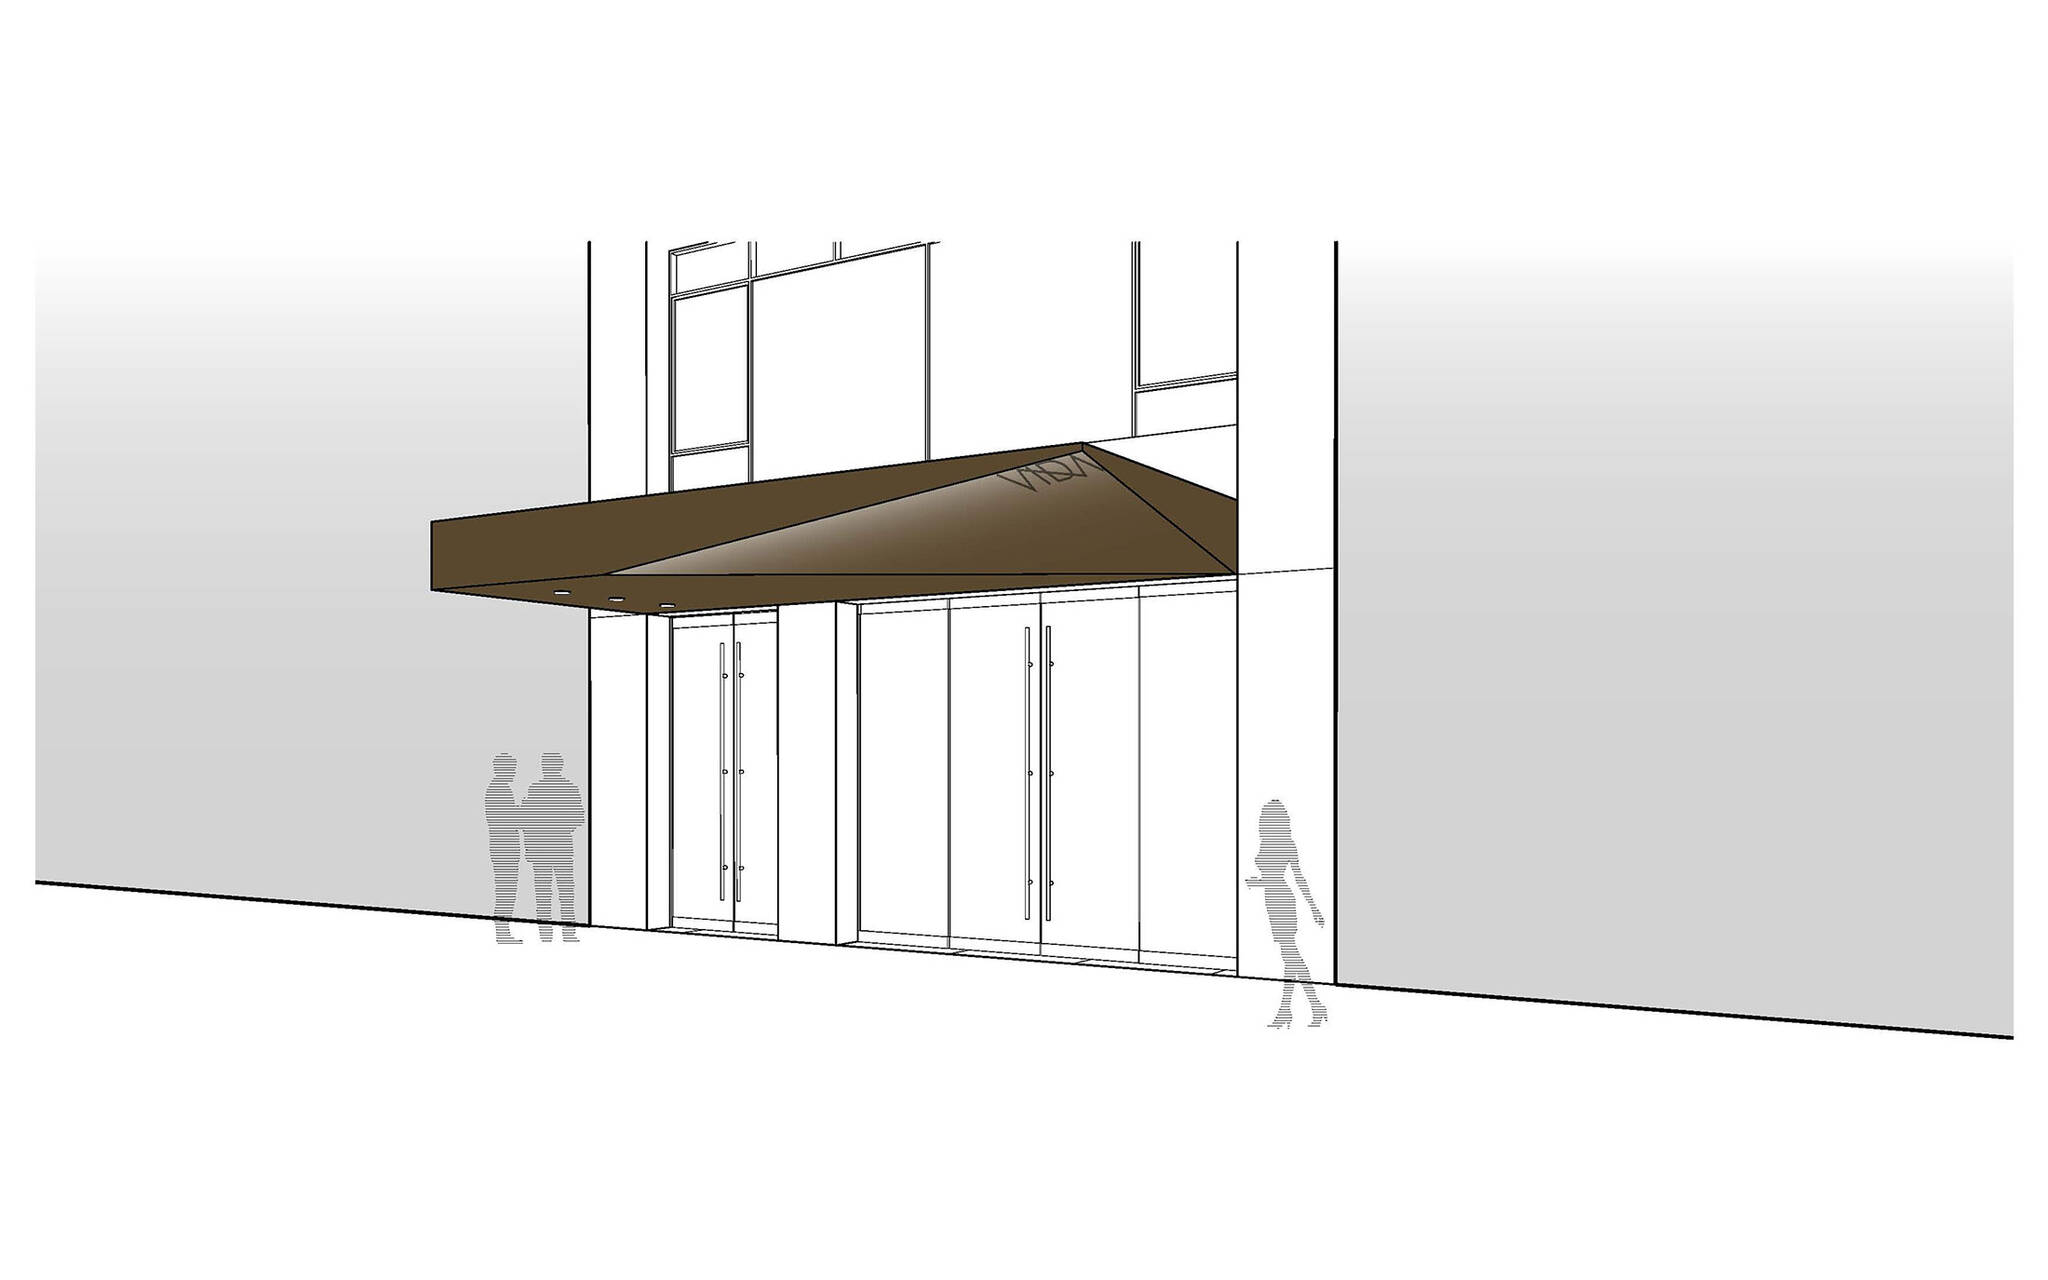 Sidewalk diagram of the Vida Shoes International canopy project for the shop located at 29 West 56th Street in Midtown, New York City designed by the architecture studio Danny Forster & Architecture